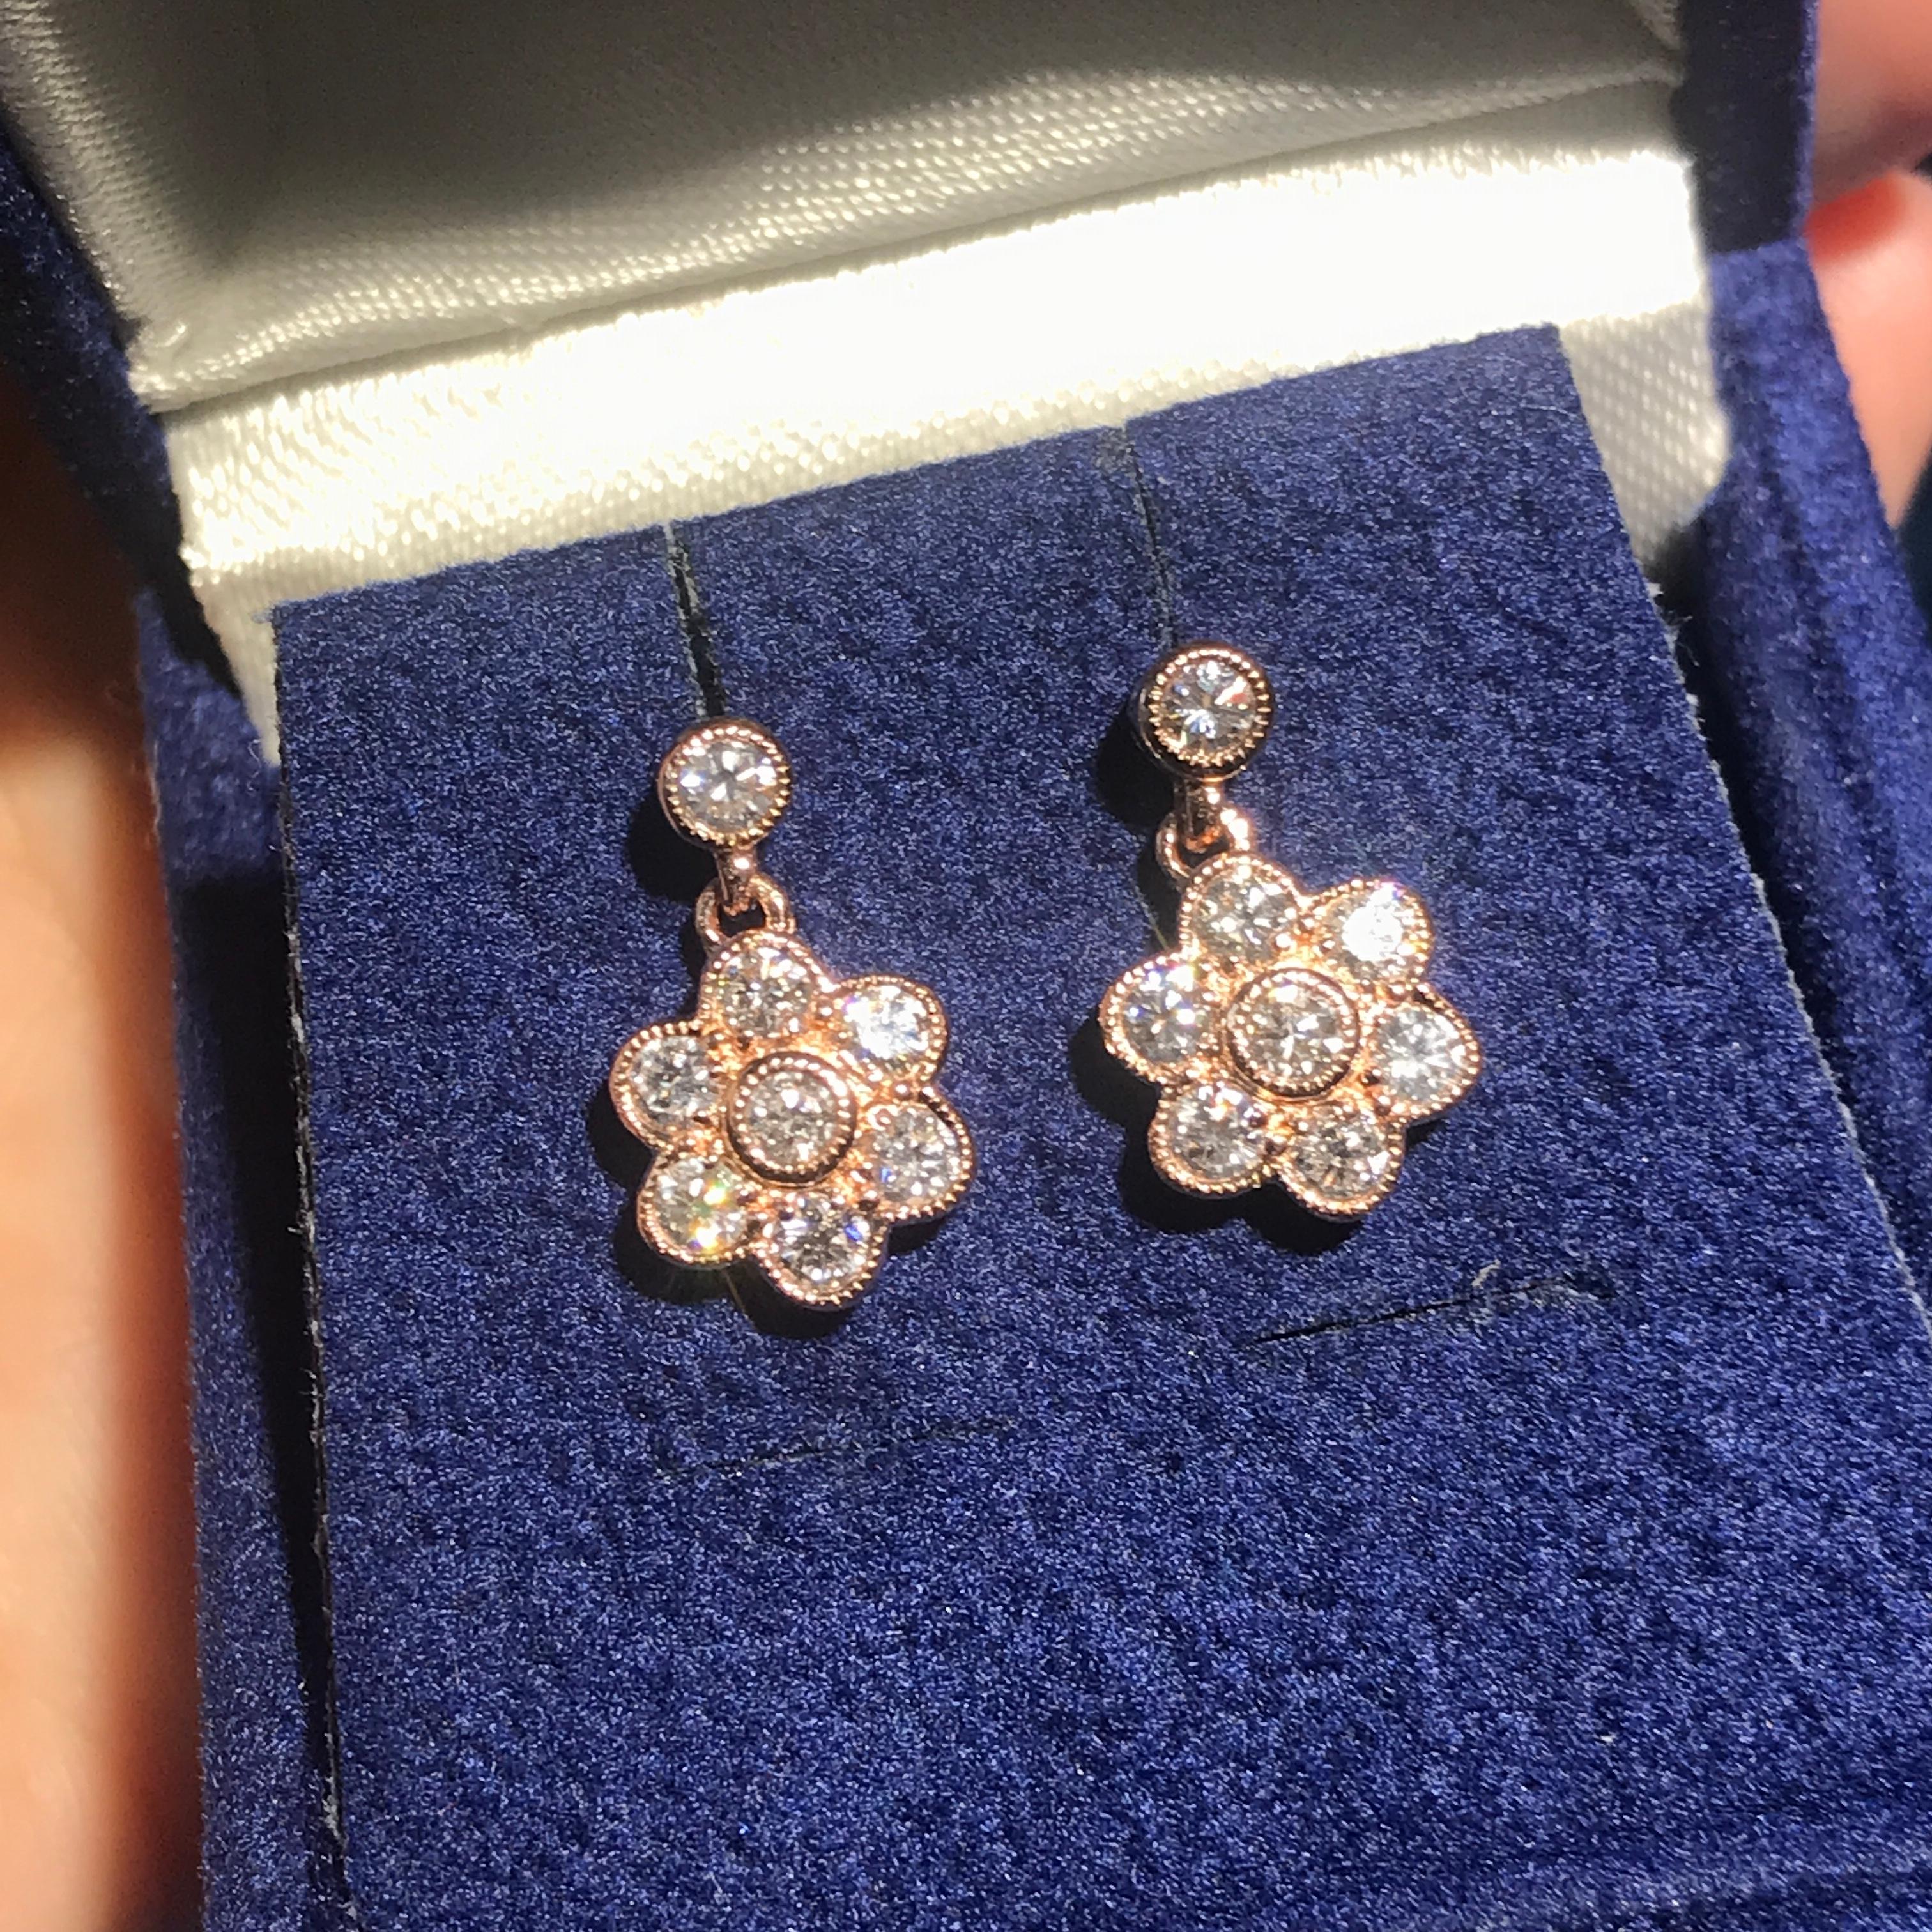 Sparkling round diamonds resembles brilliant flowers in each of these elegant drop earrings for her. Styled in 14k rose gold, the earrings have an approximate total diamond weight of 1 carat and are secure with butterfly backs.

Earrings